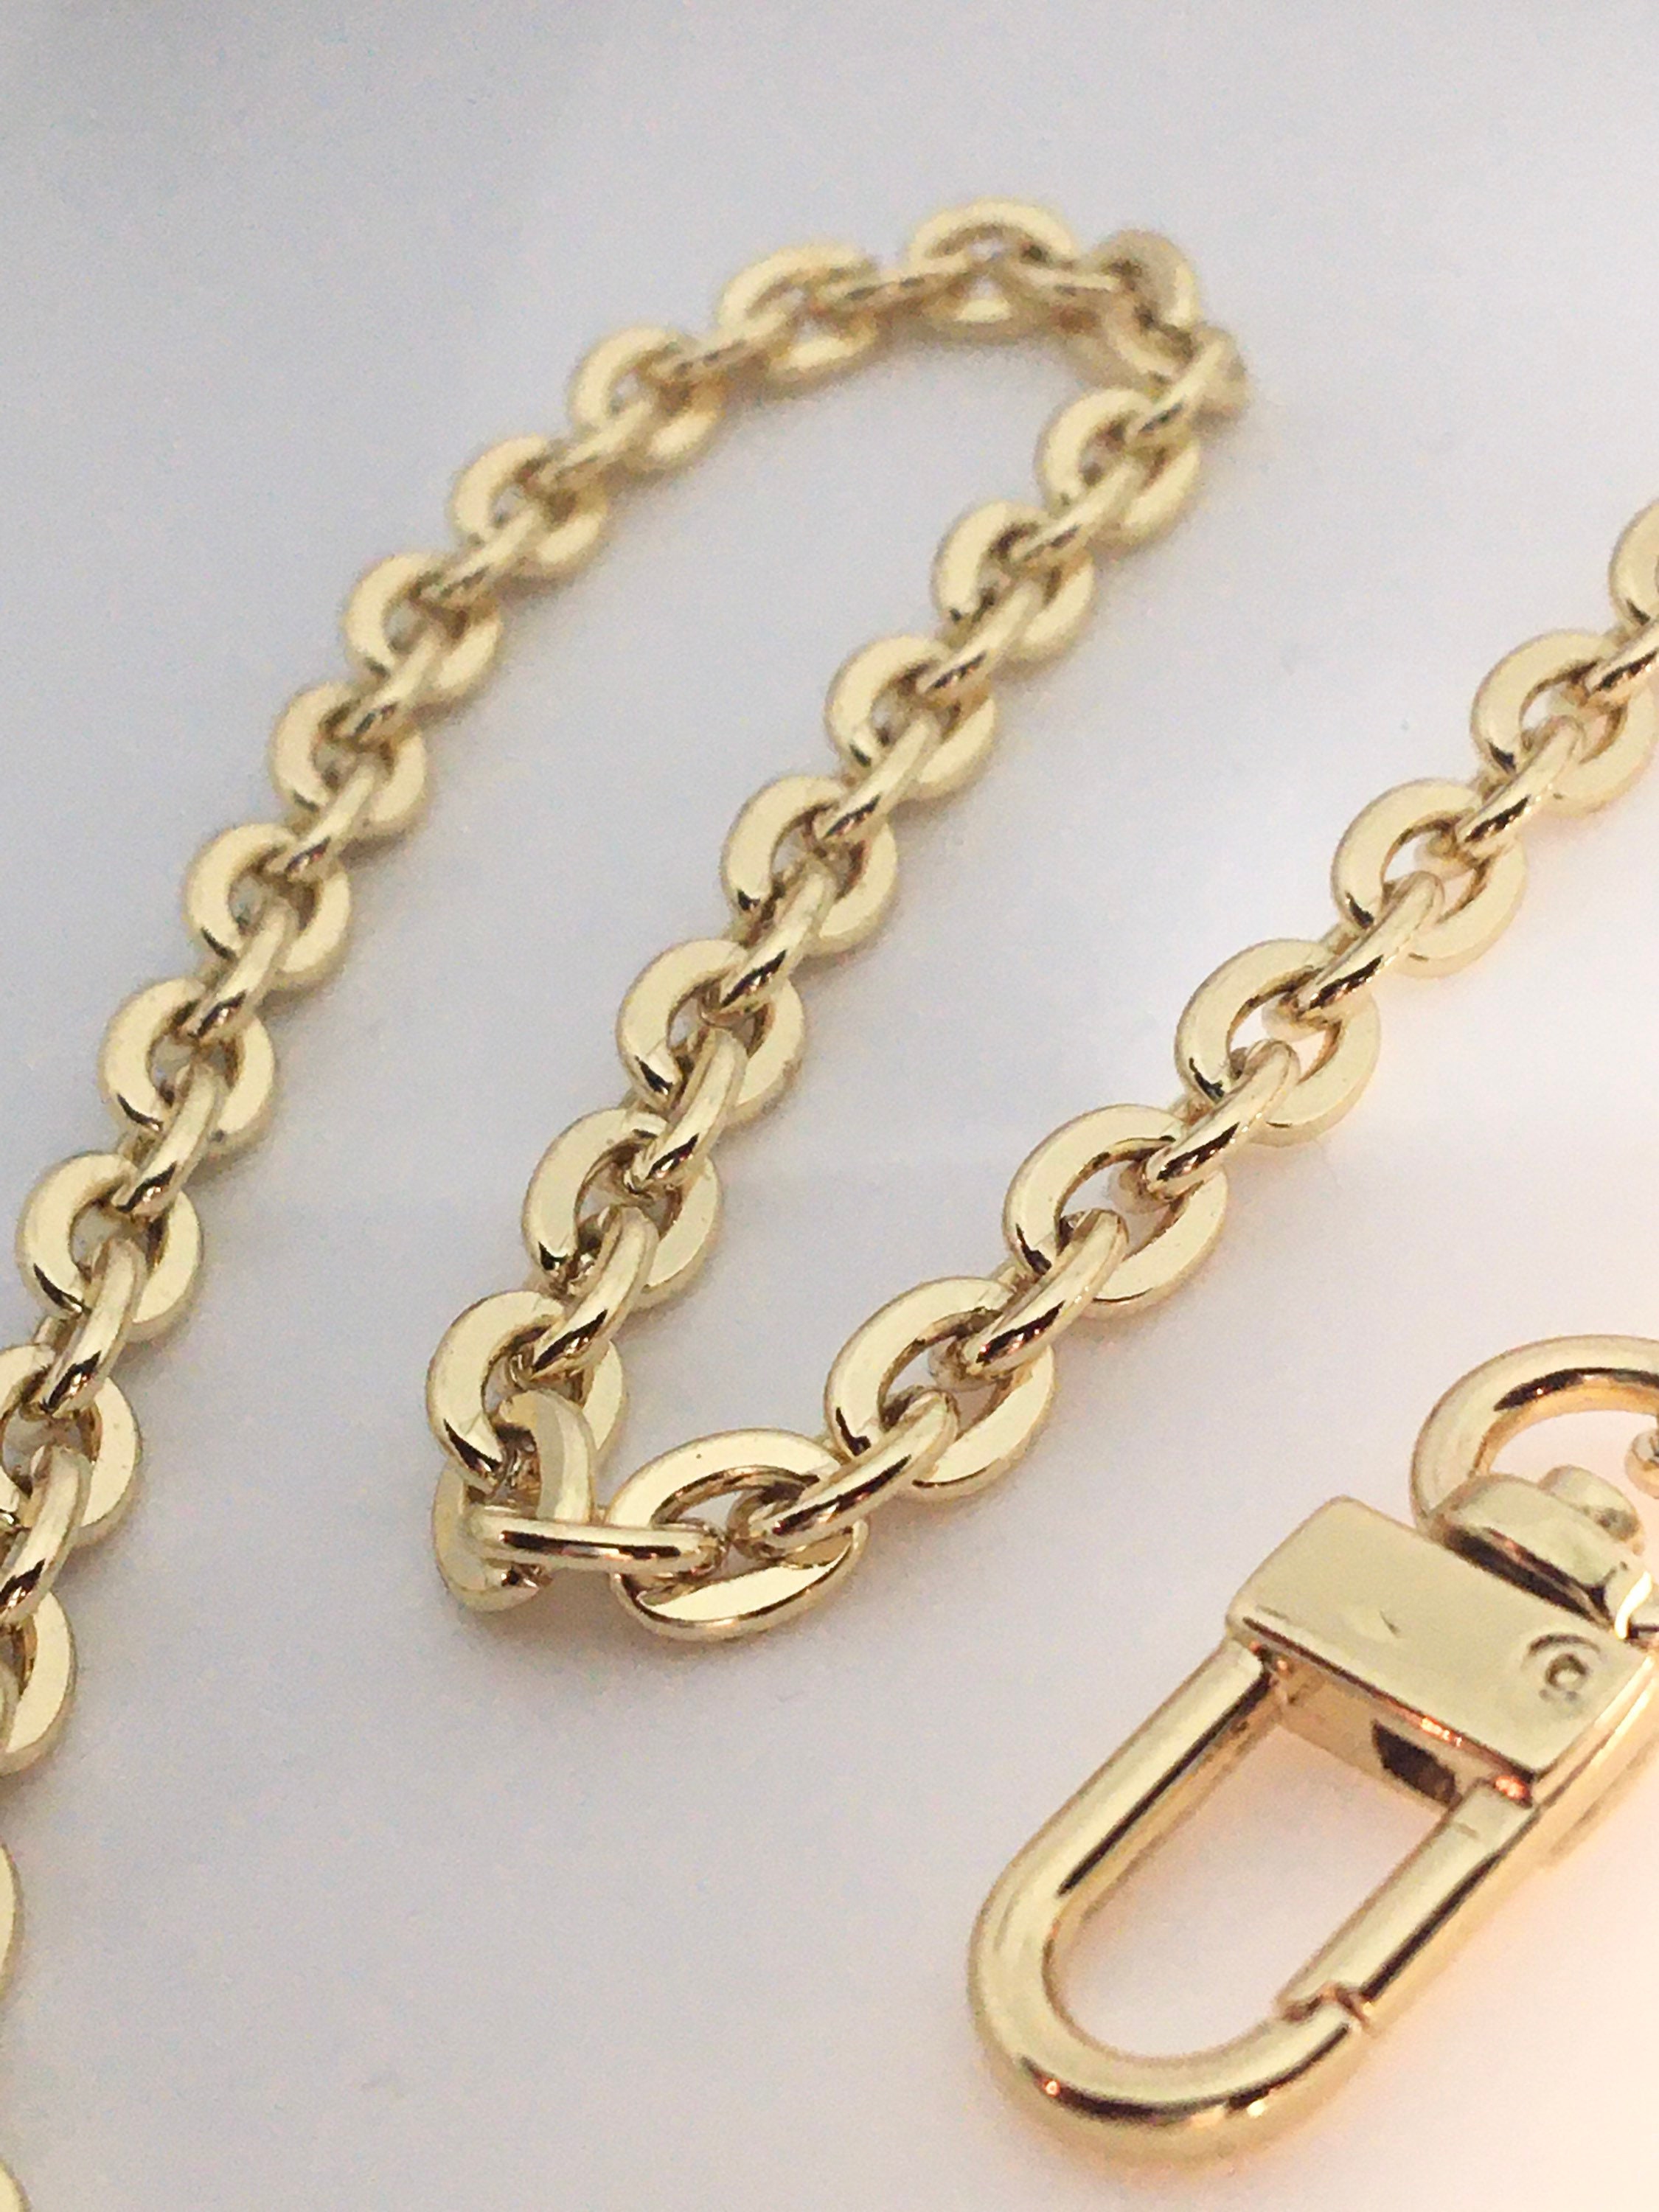 Buy Louis Vuitton LOUISVUITTON Size:-MP2461 Collier Mix Chain Links Patches  Stone Decoration Kihei Chain Necklace from Japan - Buy authentic Plus  exclusive items from Japan